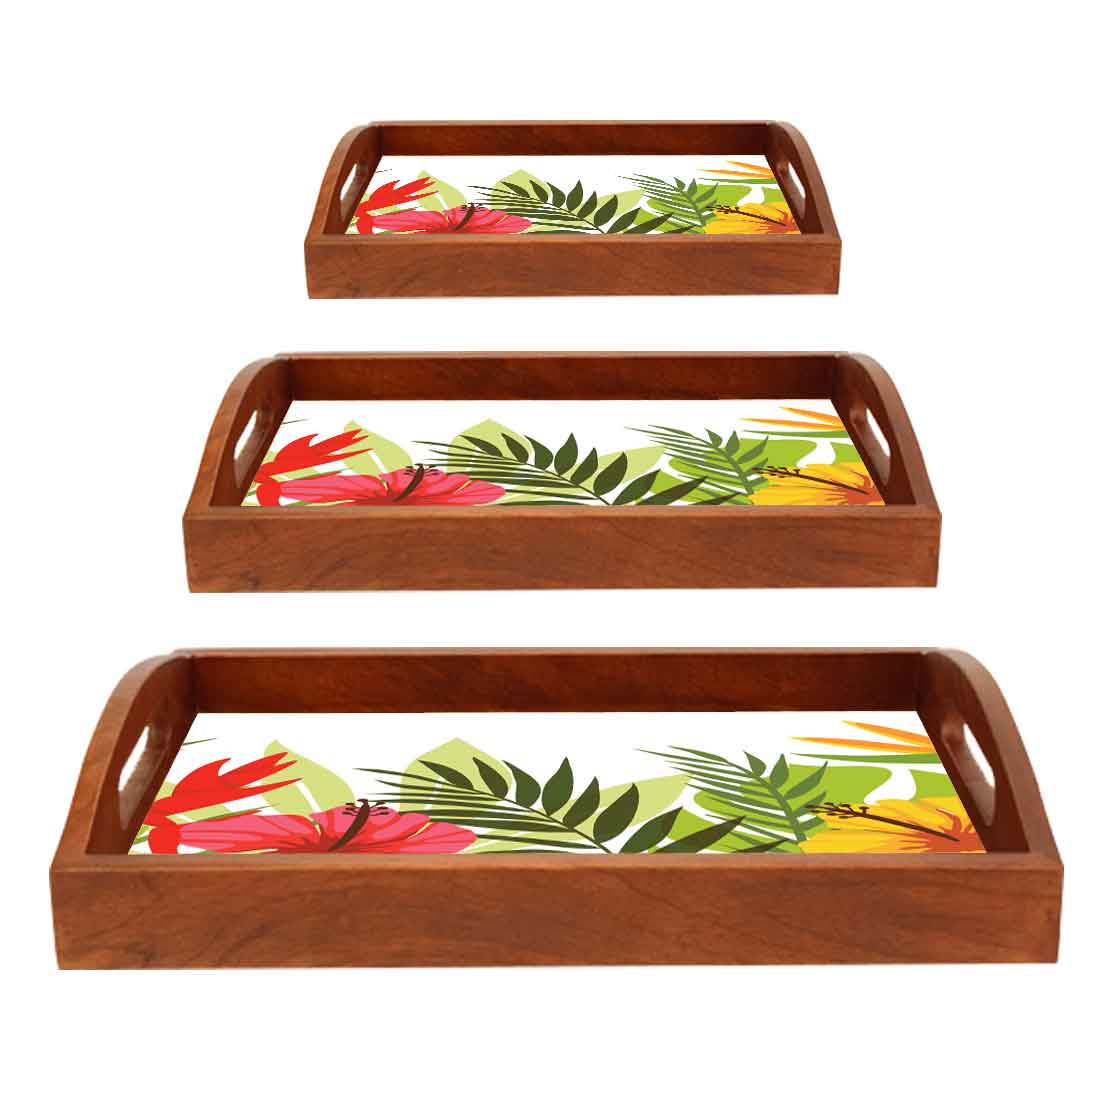 Wooden Tray Set Of 3 for Dining and Kitchen Use